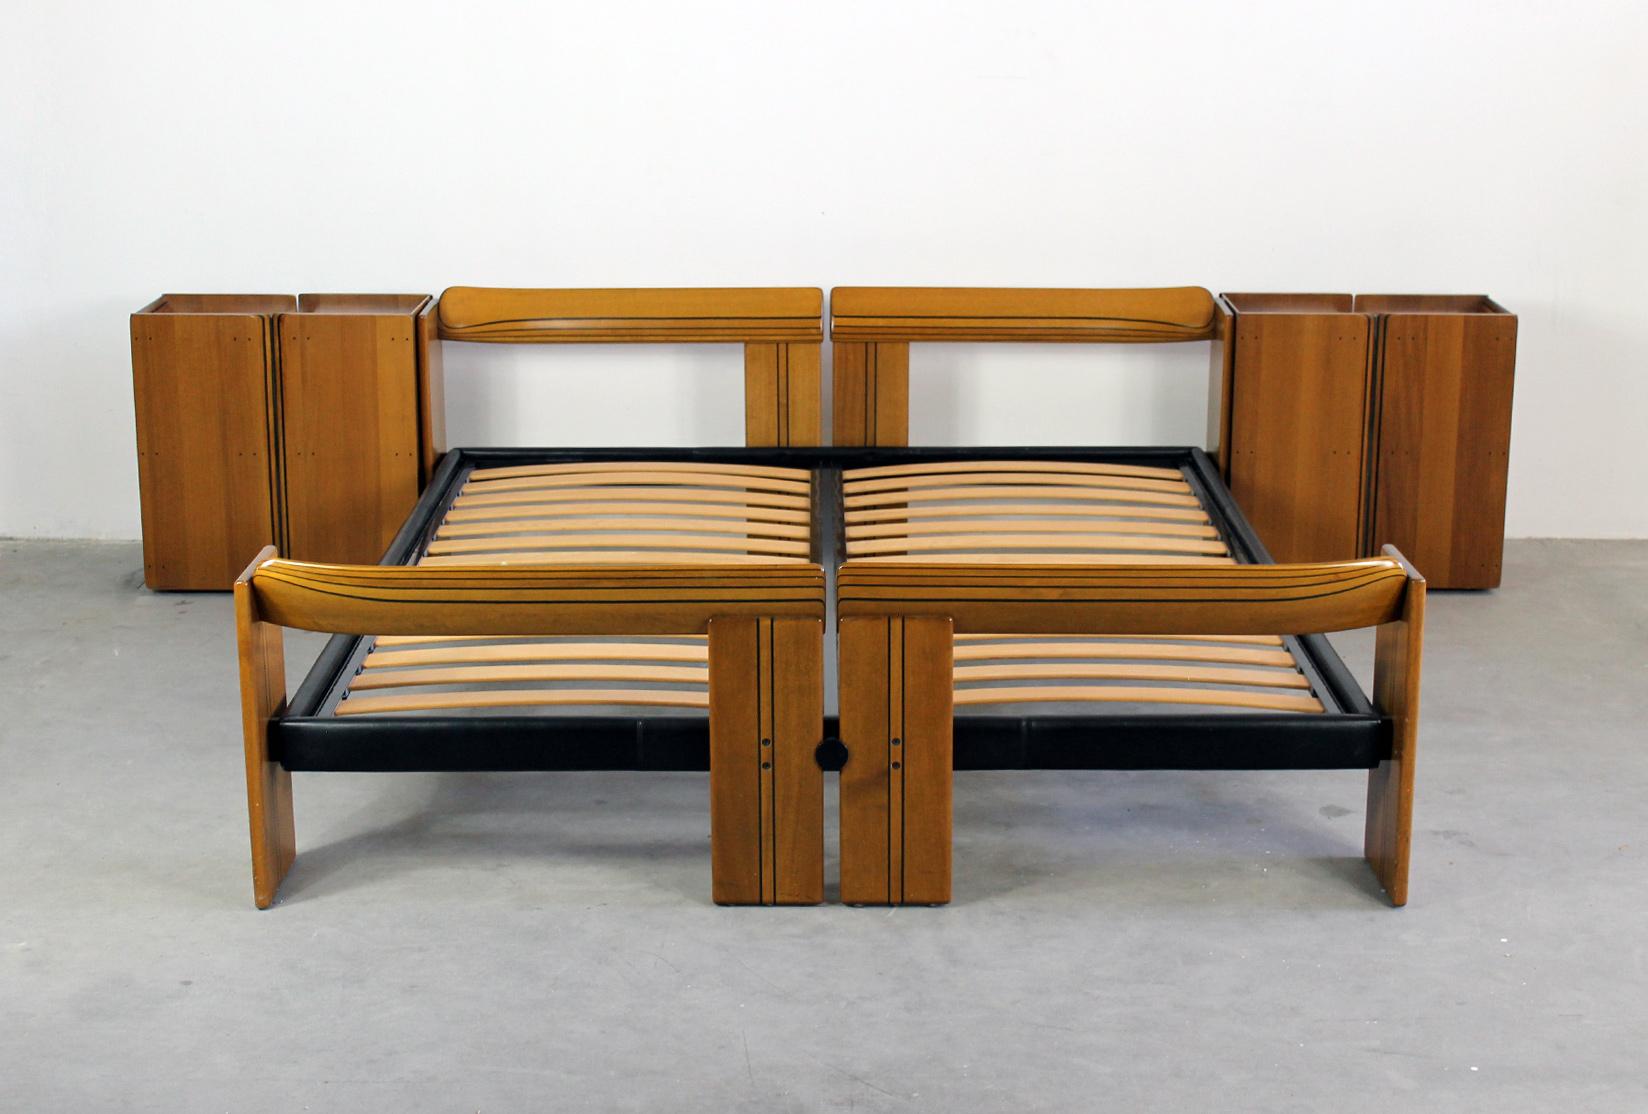 Mid-Century Modern Tobia & Afra Scarpa Bedroom Set Artona with Bed and Nightstands by Maxalto 1970s For Sale